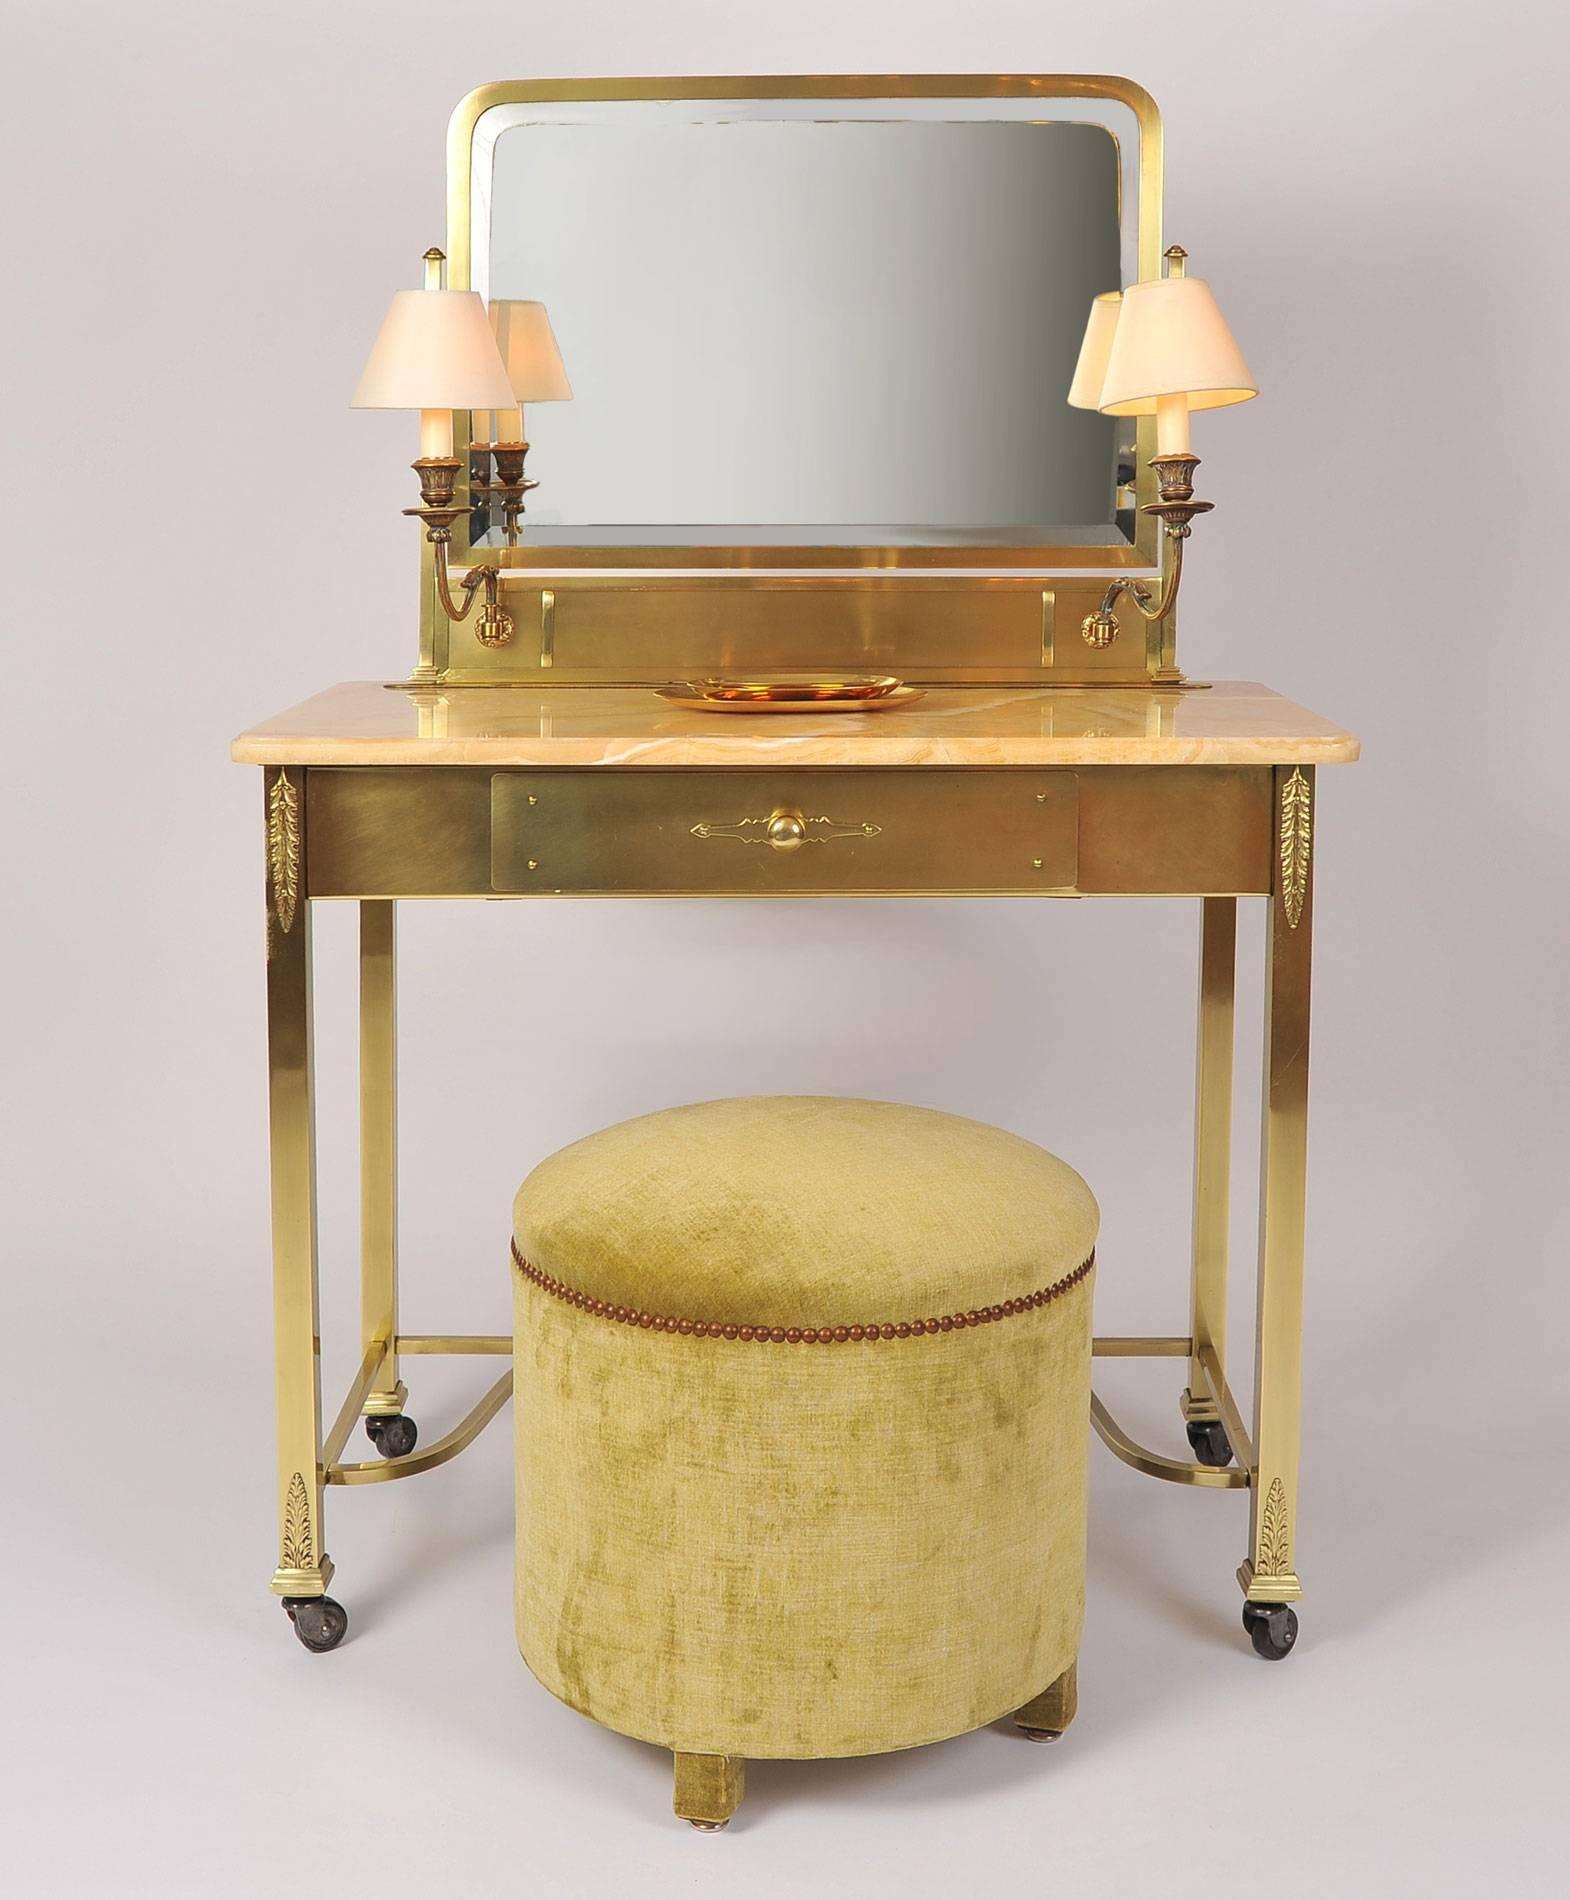 Well-proportioned brass dressing table or vanity with honey-colored marble top, on wheels, with single drawer, integrated rectangular mirror and lamp holders.